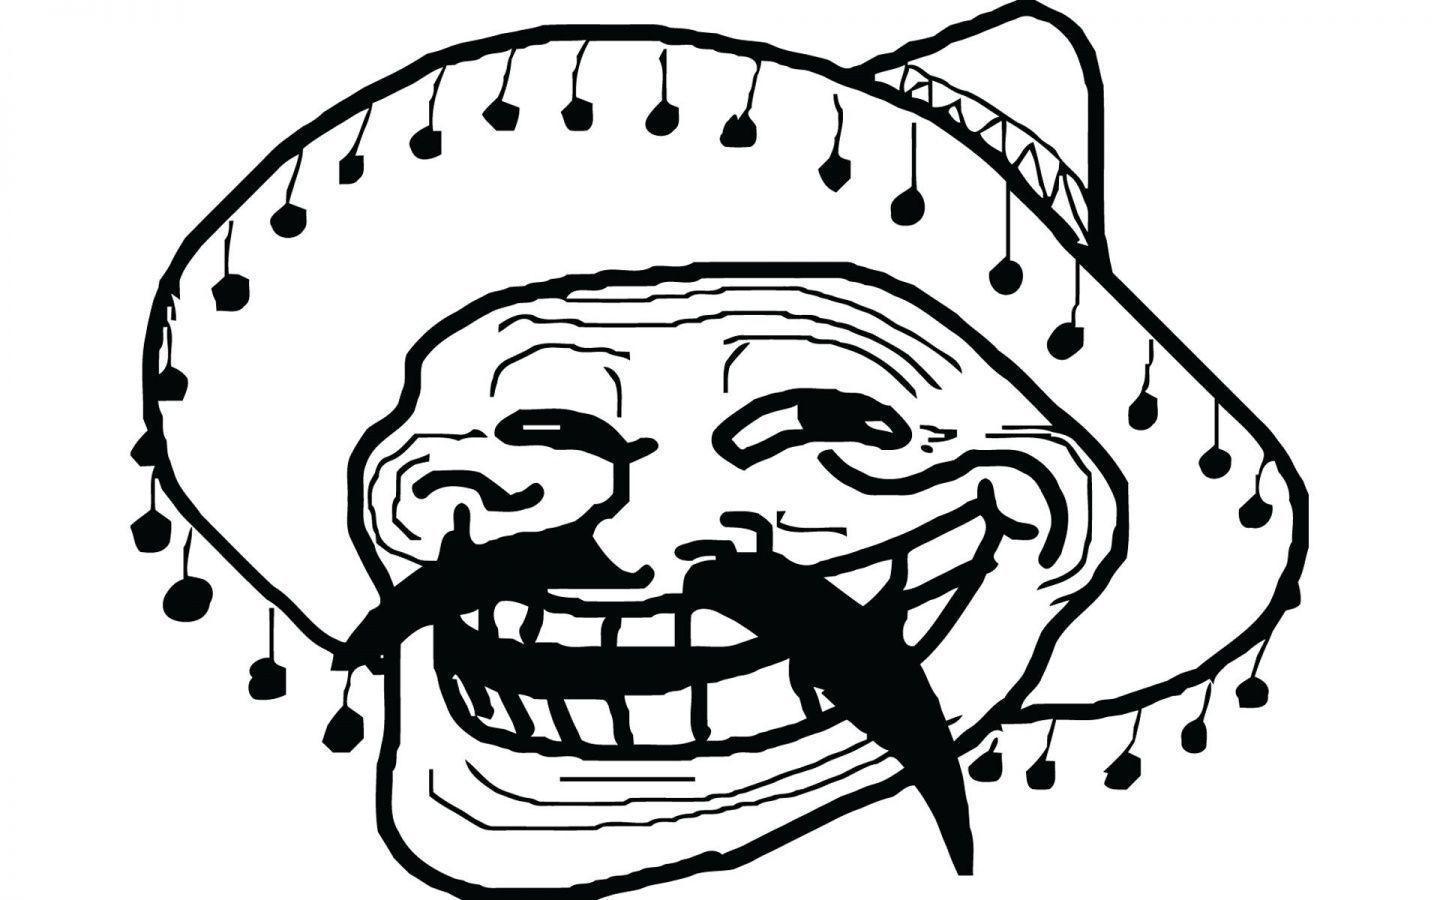 Download Mexicano Troll Face Wallpaper in 1440x900 Resolution